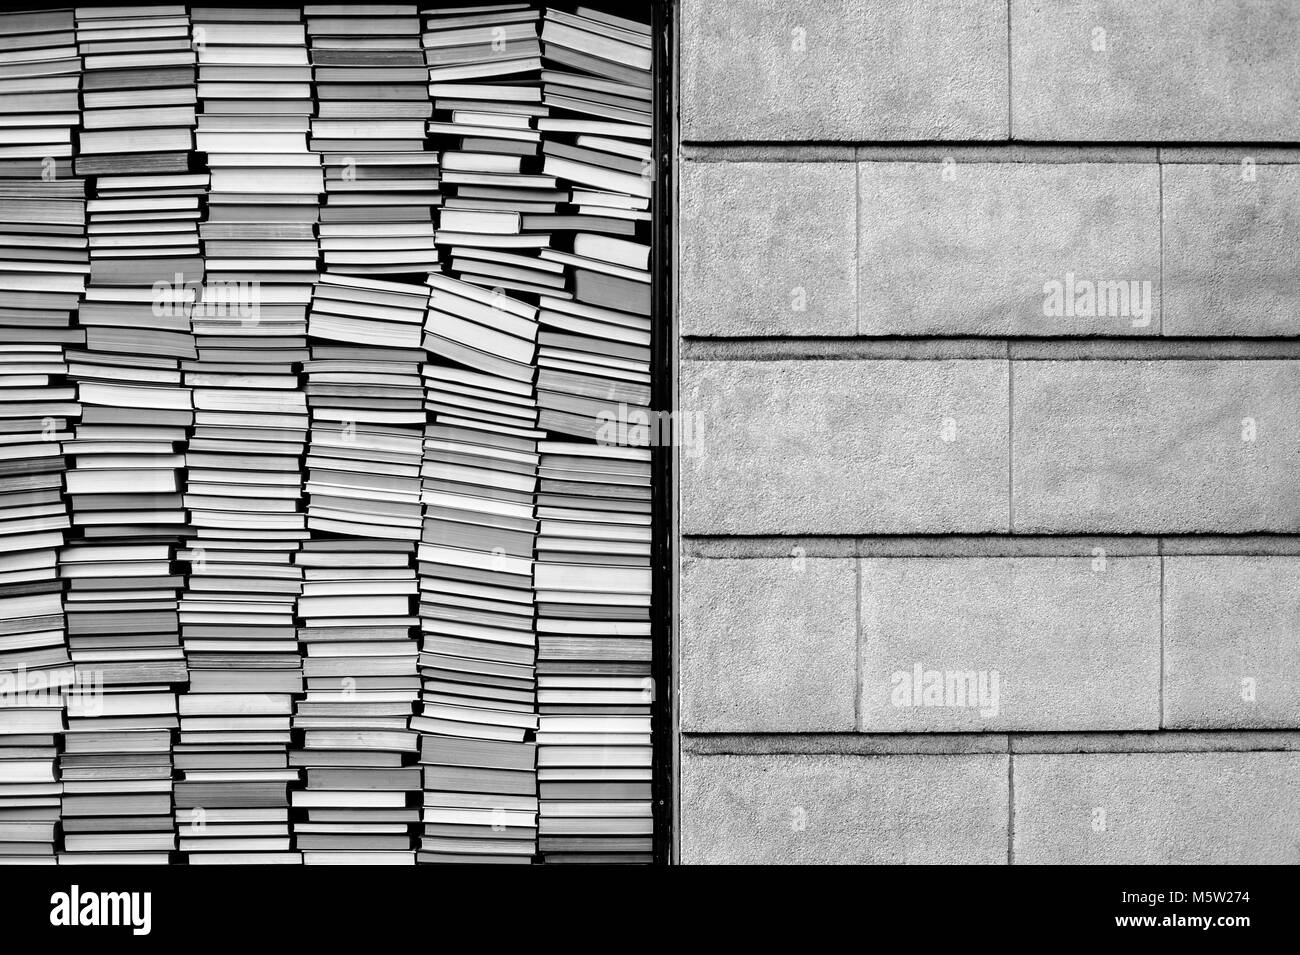 Books stacked against window with brick wall beside them Stock Photo